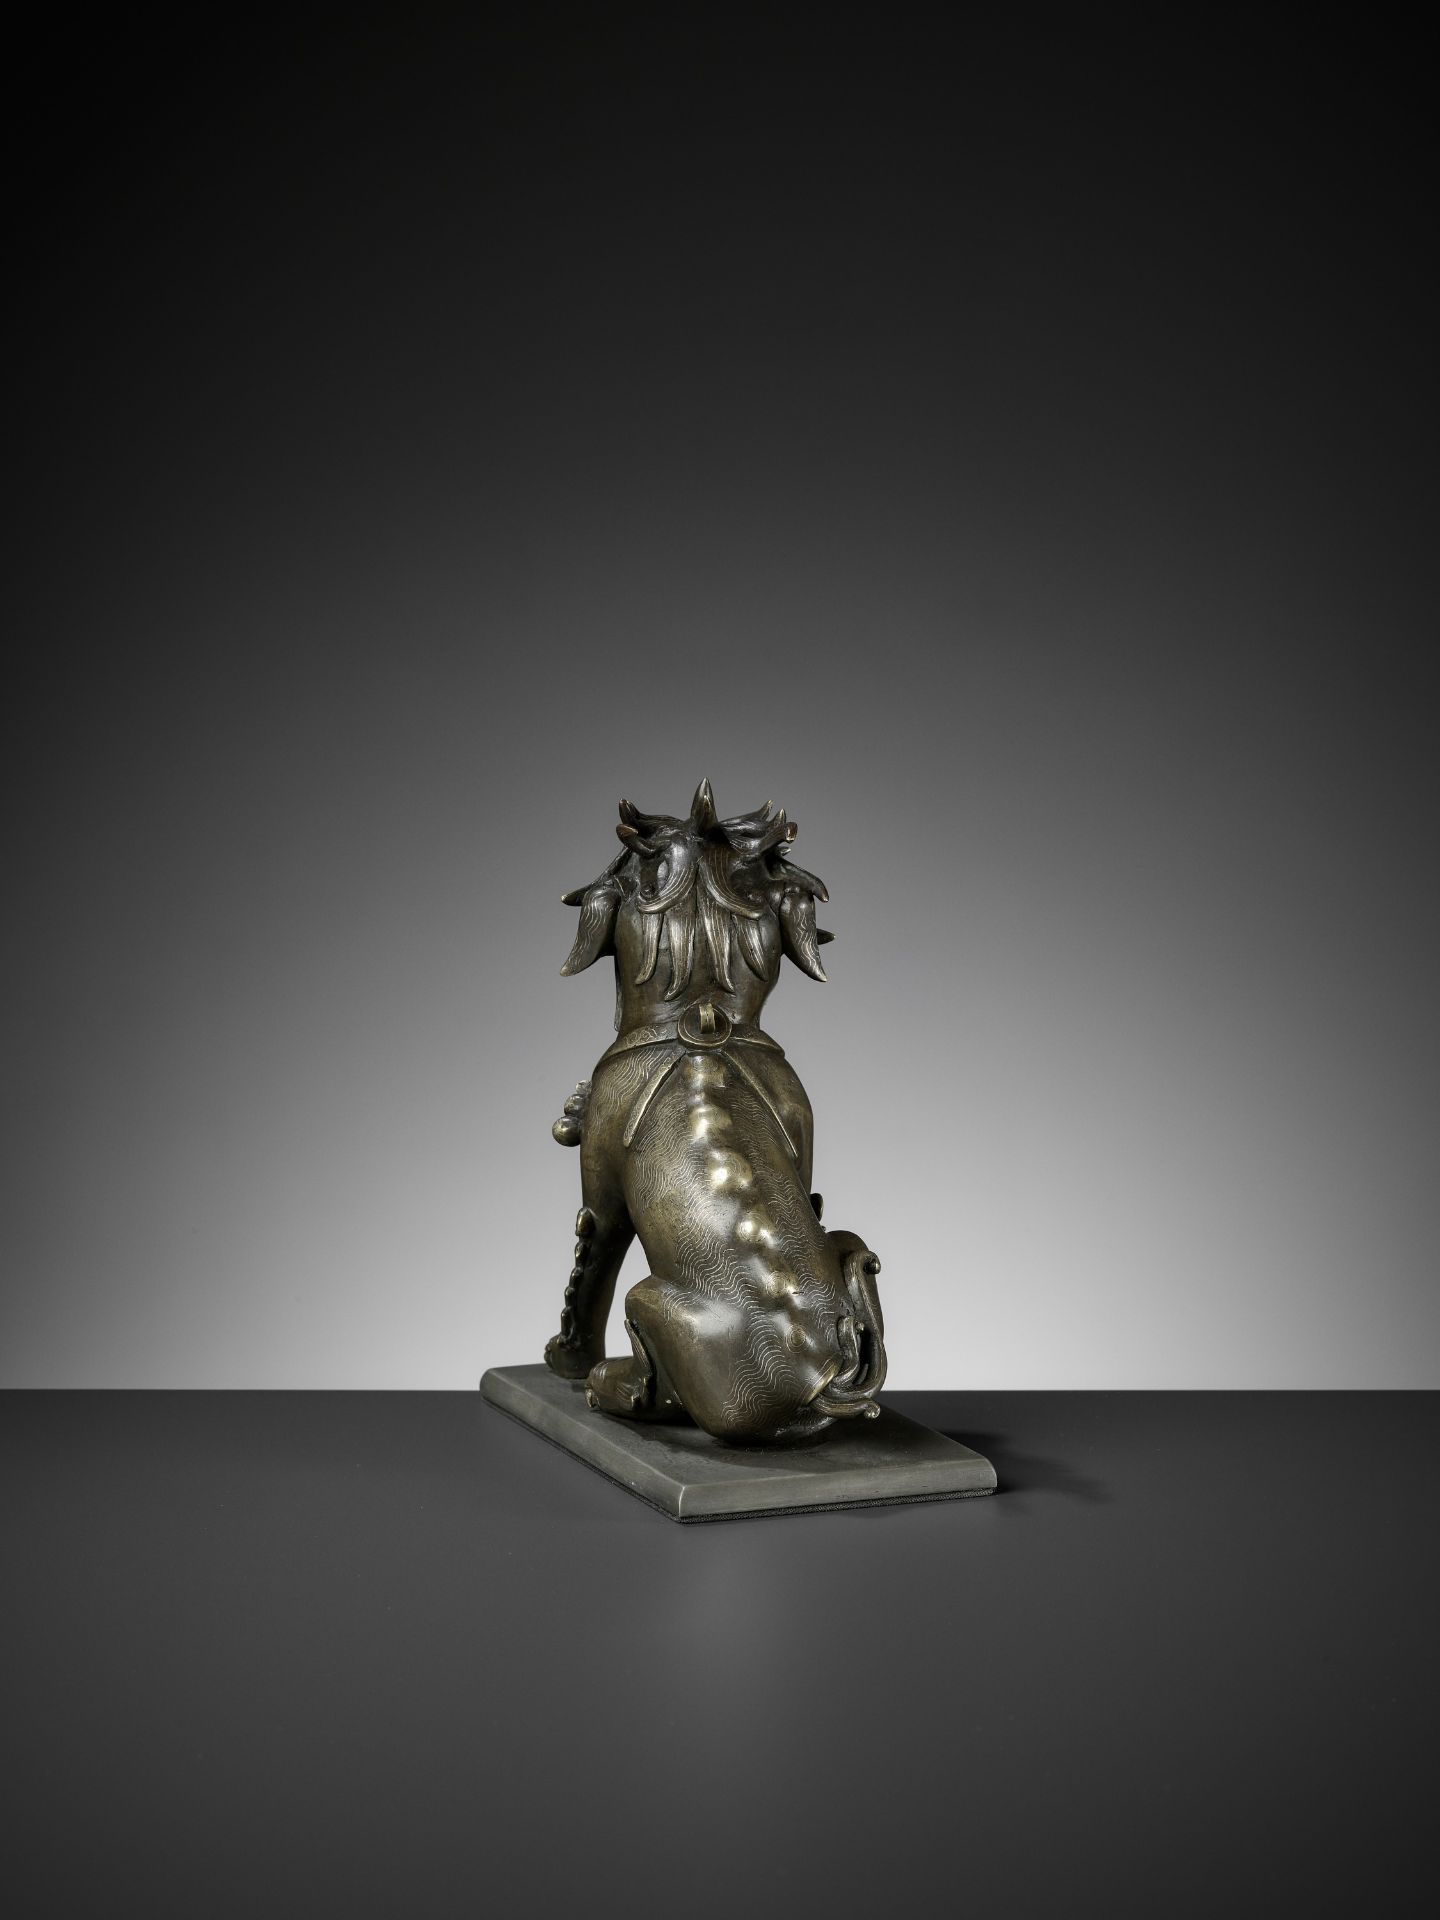 A SILVER WIRE-INLAID BRONZE FIGURE OF A QILIN, ATTRIBUTED TO SHISOU, QING DYNASTY - Image 7 of 12